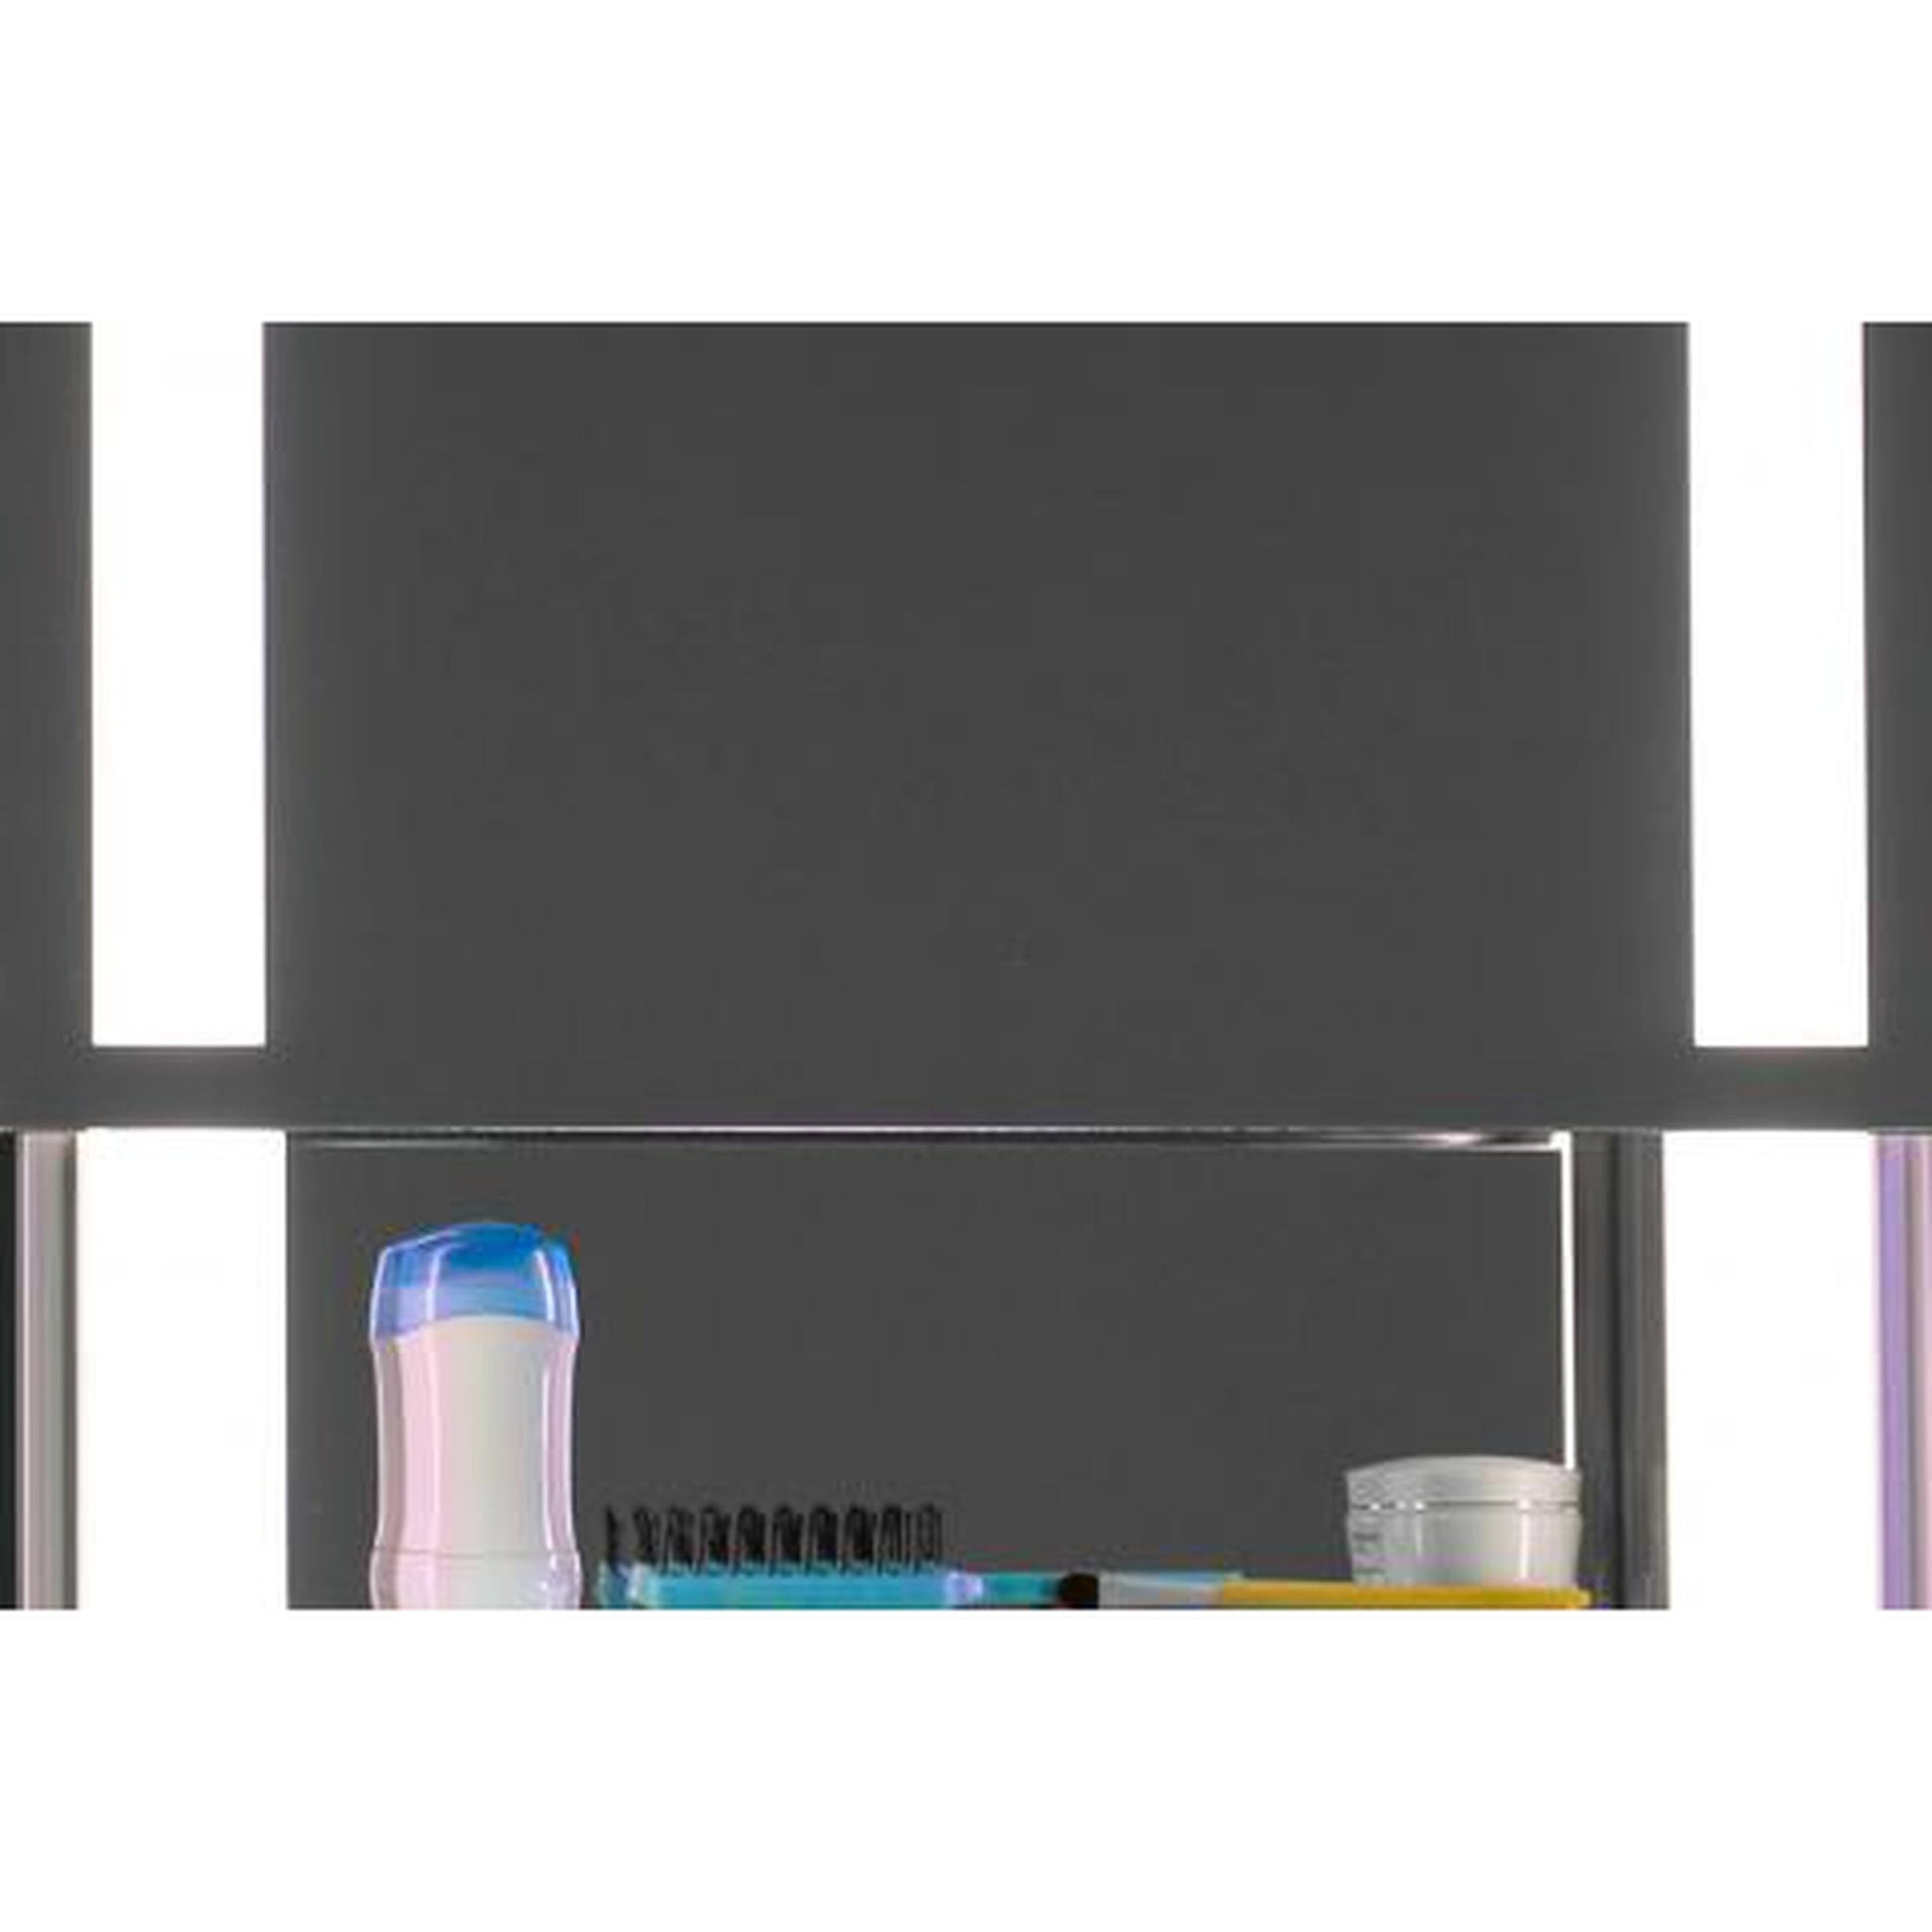 Sidler SideLight 31" x 29" 4000K Single Gliding Mirror Door Anodized Aluminum Medicine Cabinet With Built-in GFCI Outlet and USB port